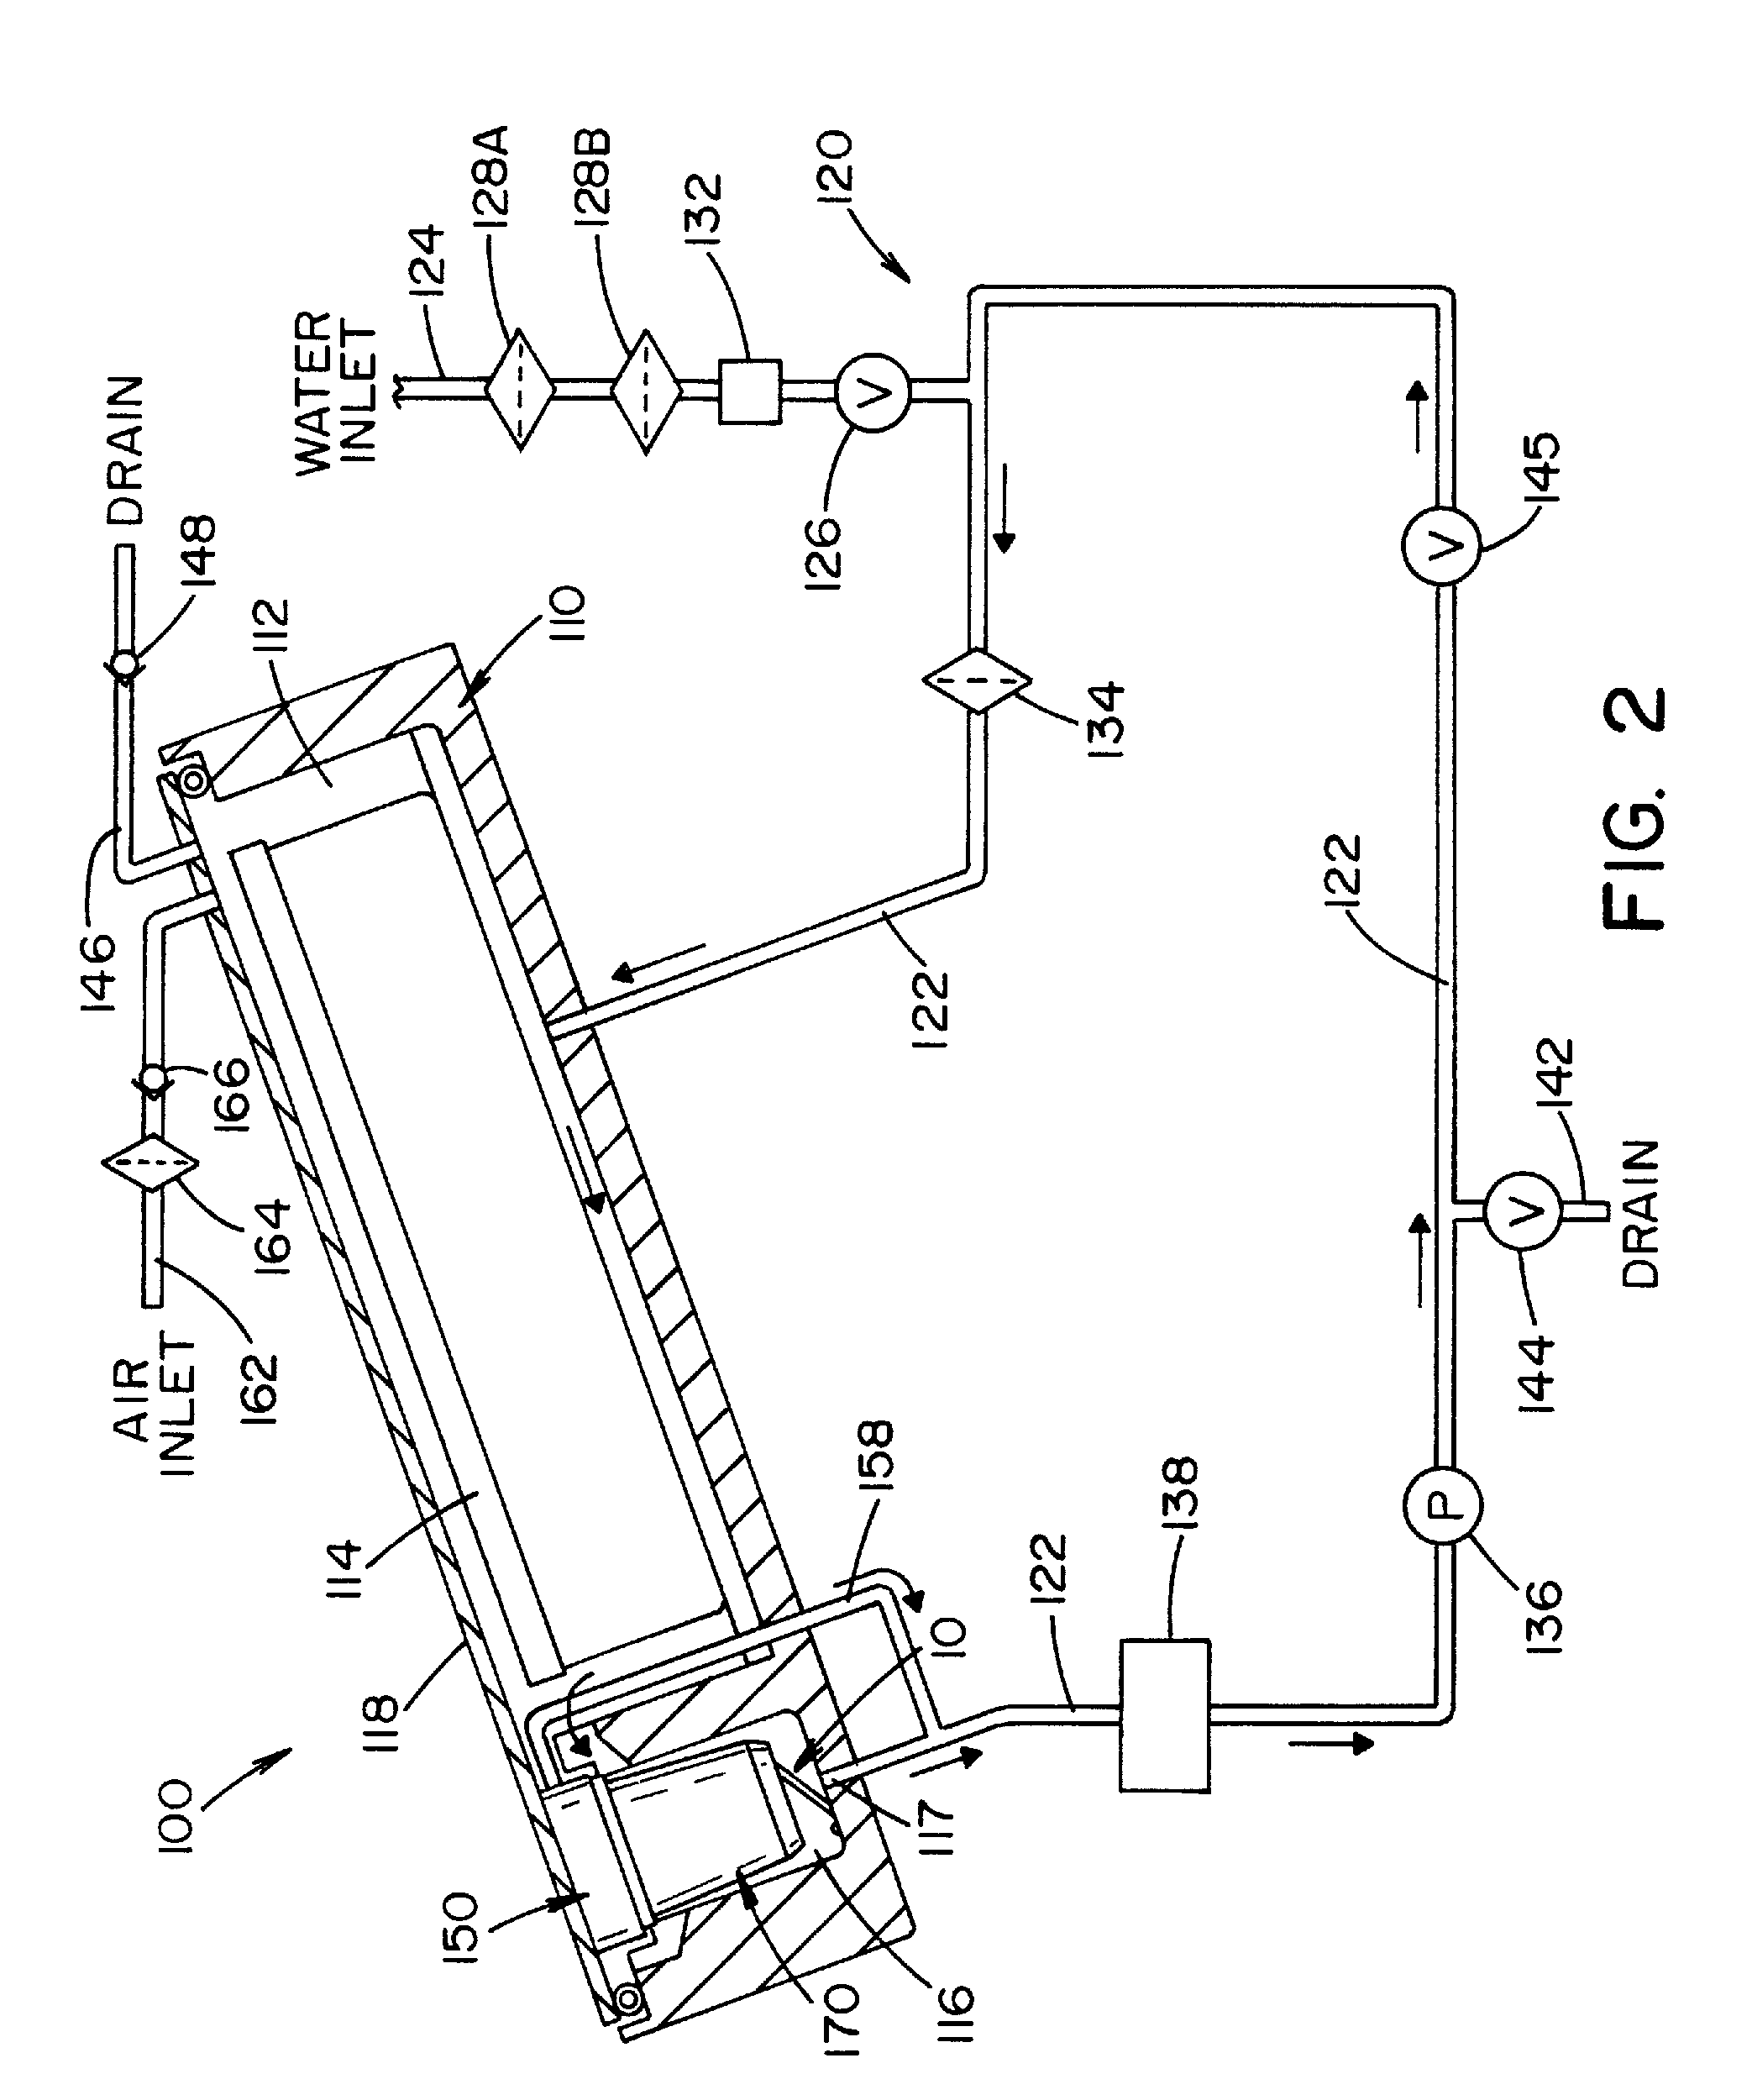 Apparatus for releasing a dry chemistry into a liquid sterilization system